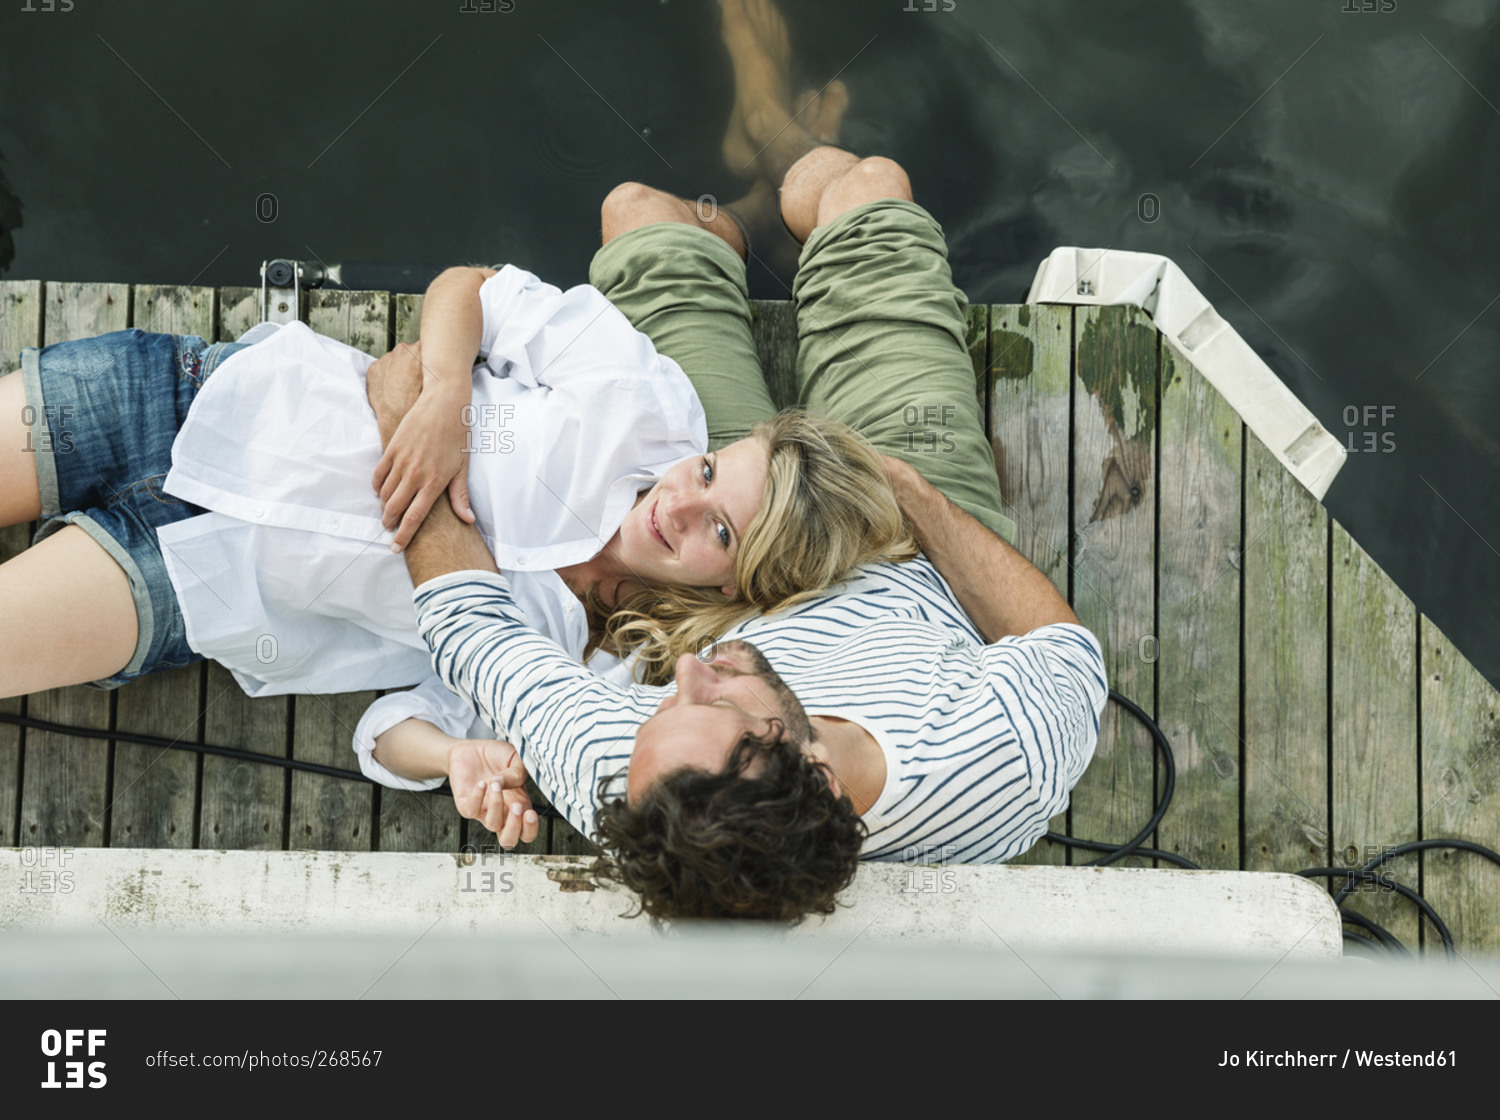 Smiling woman lying on man's lap at the water